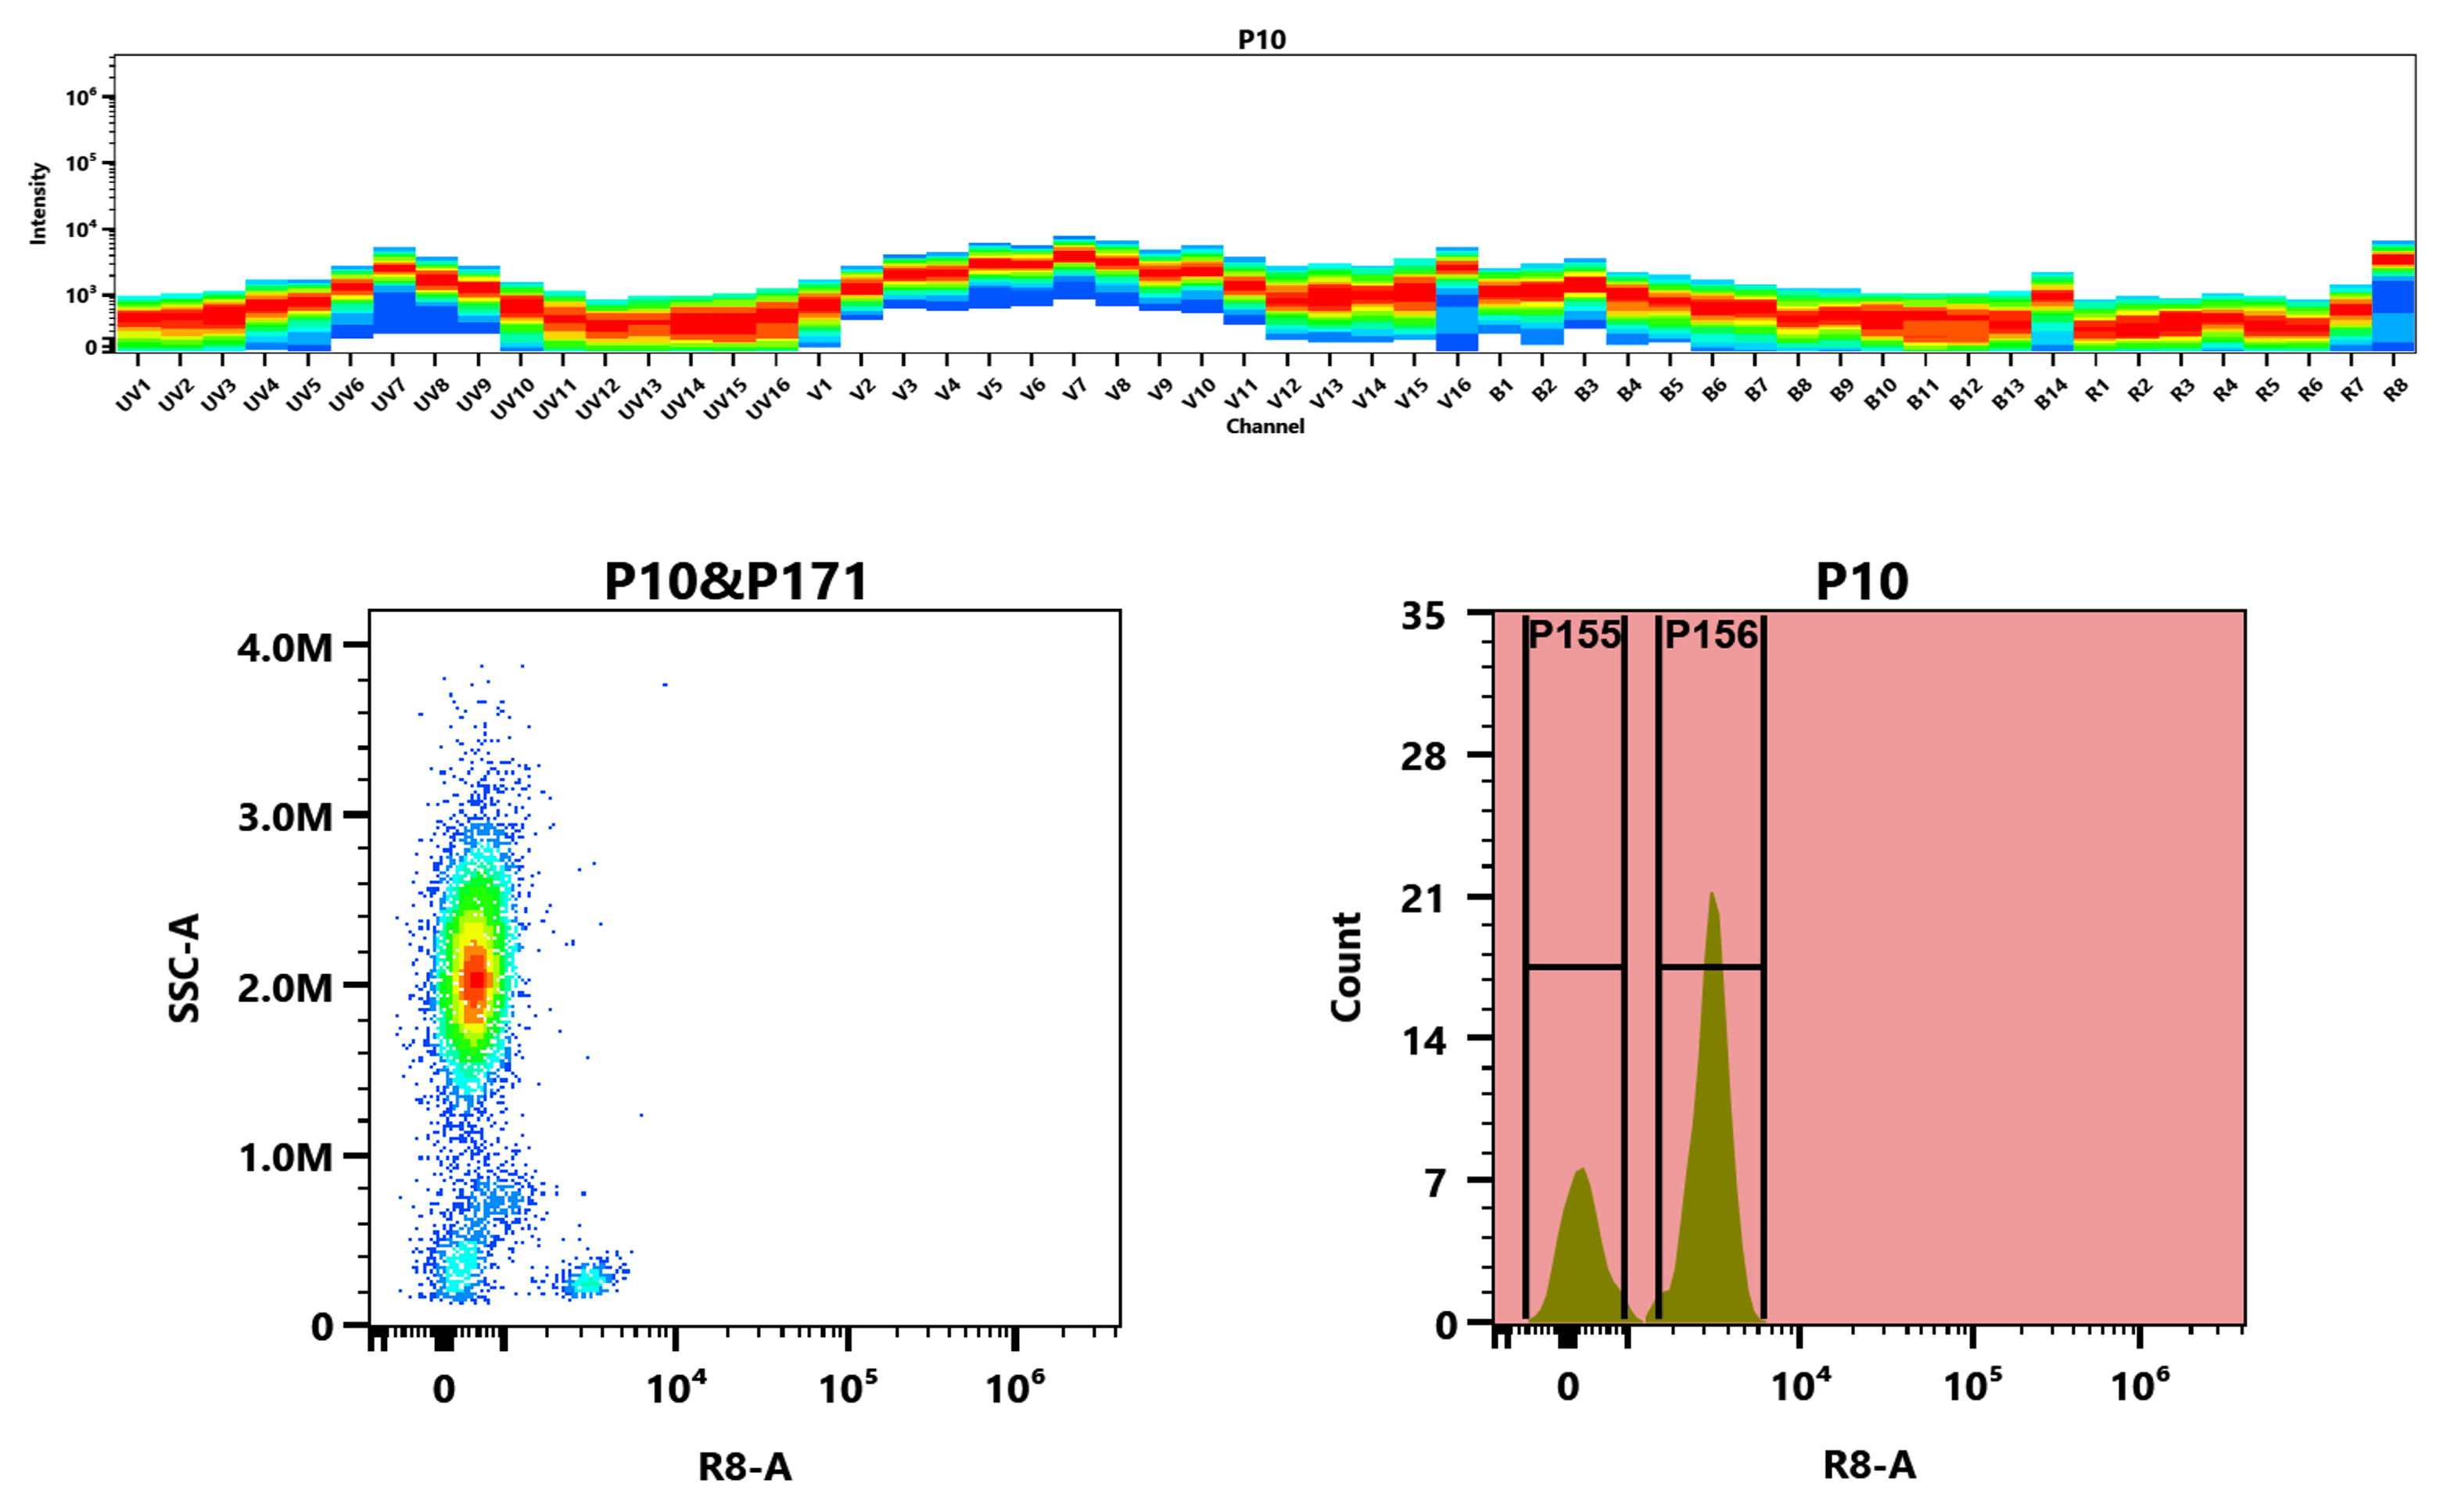 Top) The Spectral pattern was generated using a 4-laser spectral cytometer. Four spatially offset lasers (355 nm, 405 nm, 488 nm, and 640 nm) were used to create four distinct emission profiles, which, when combined, yielded the overall spectral signature. Bottom) Flow cytometry analysis of whole blood stained with iFluor® 800 anti-human CD4 *SK3* conjugate. The fluorescence signal was monitored using an Aurora spectral flow cytometer in the iFluor® 800 R8-A channel.